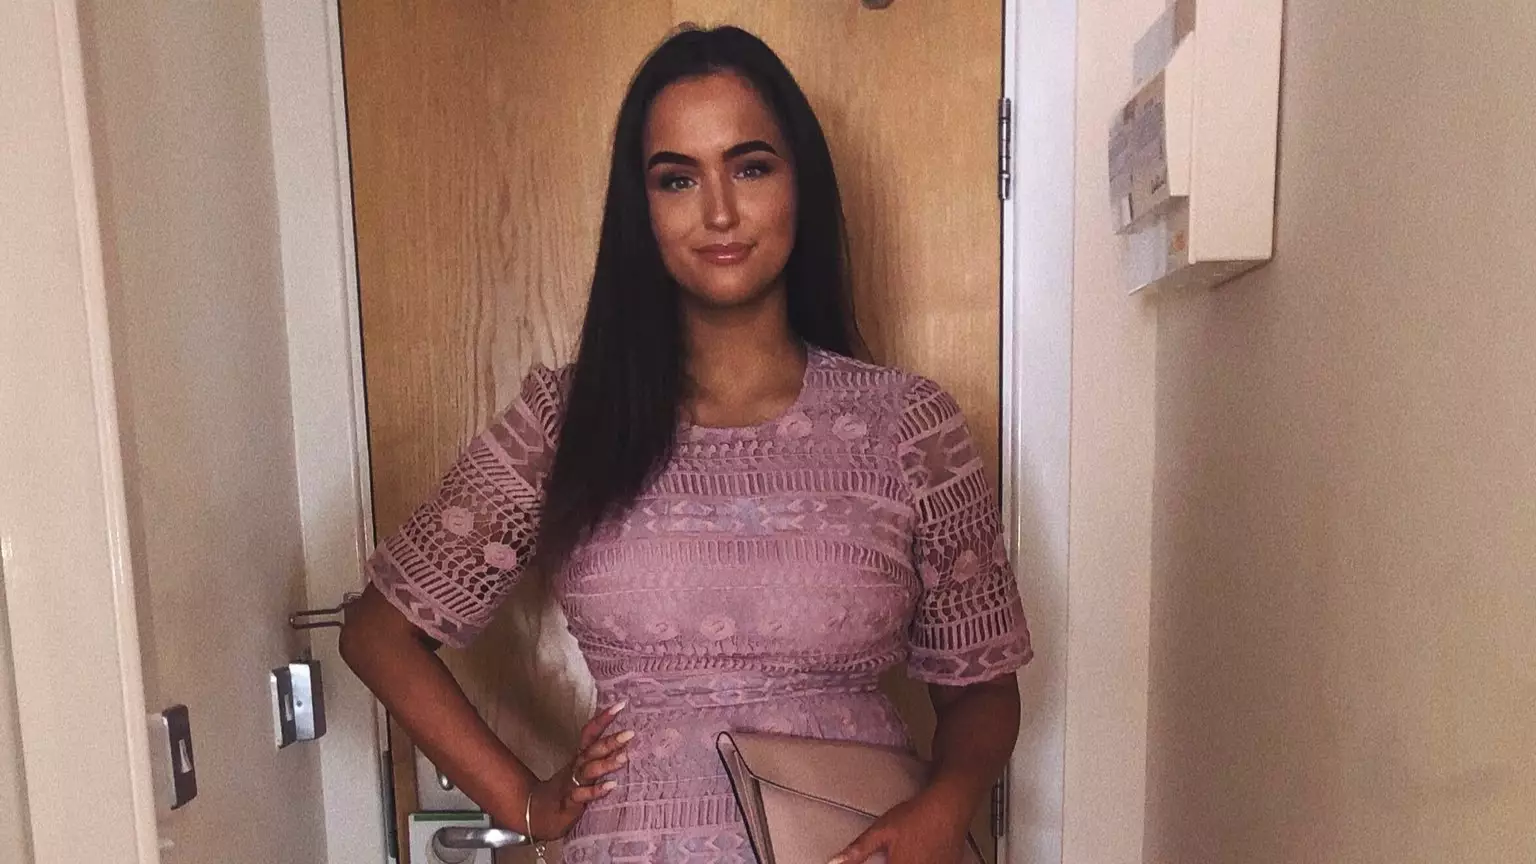 Woman Claps Back At Tinder Match Who Said Dress 'Wasn't Doing Her Any Favours'